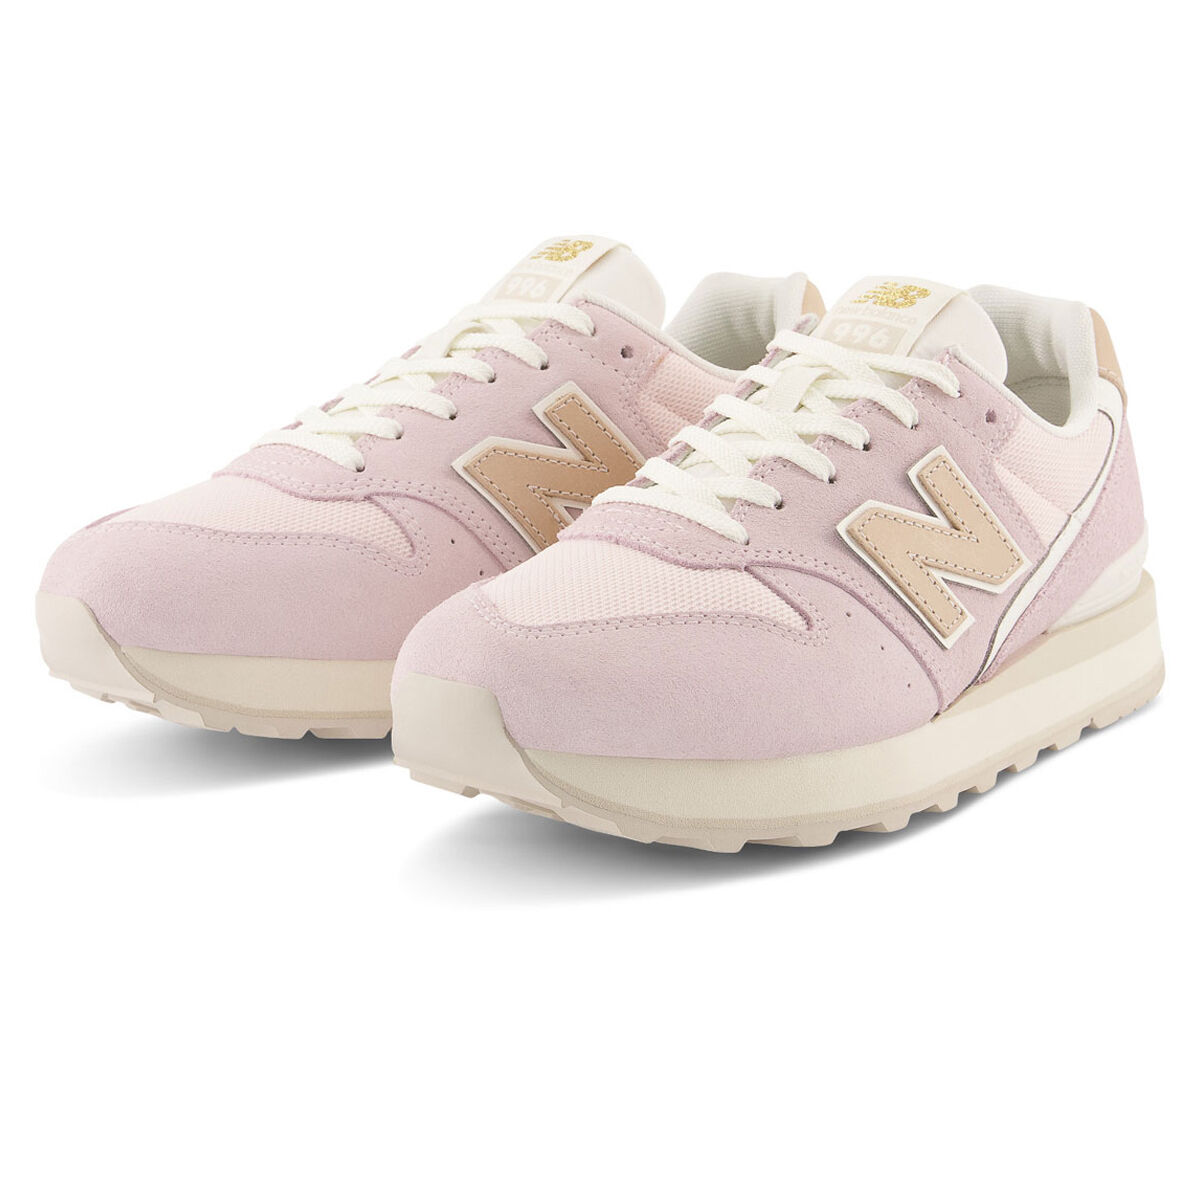 New Balance 996 V2 Womens Casual Shoes